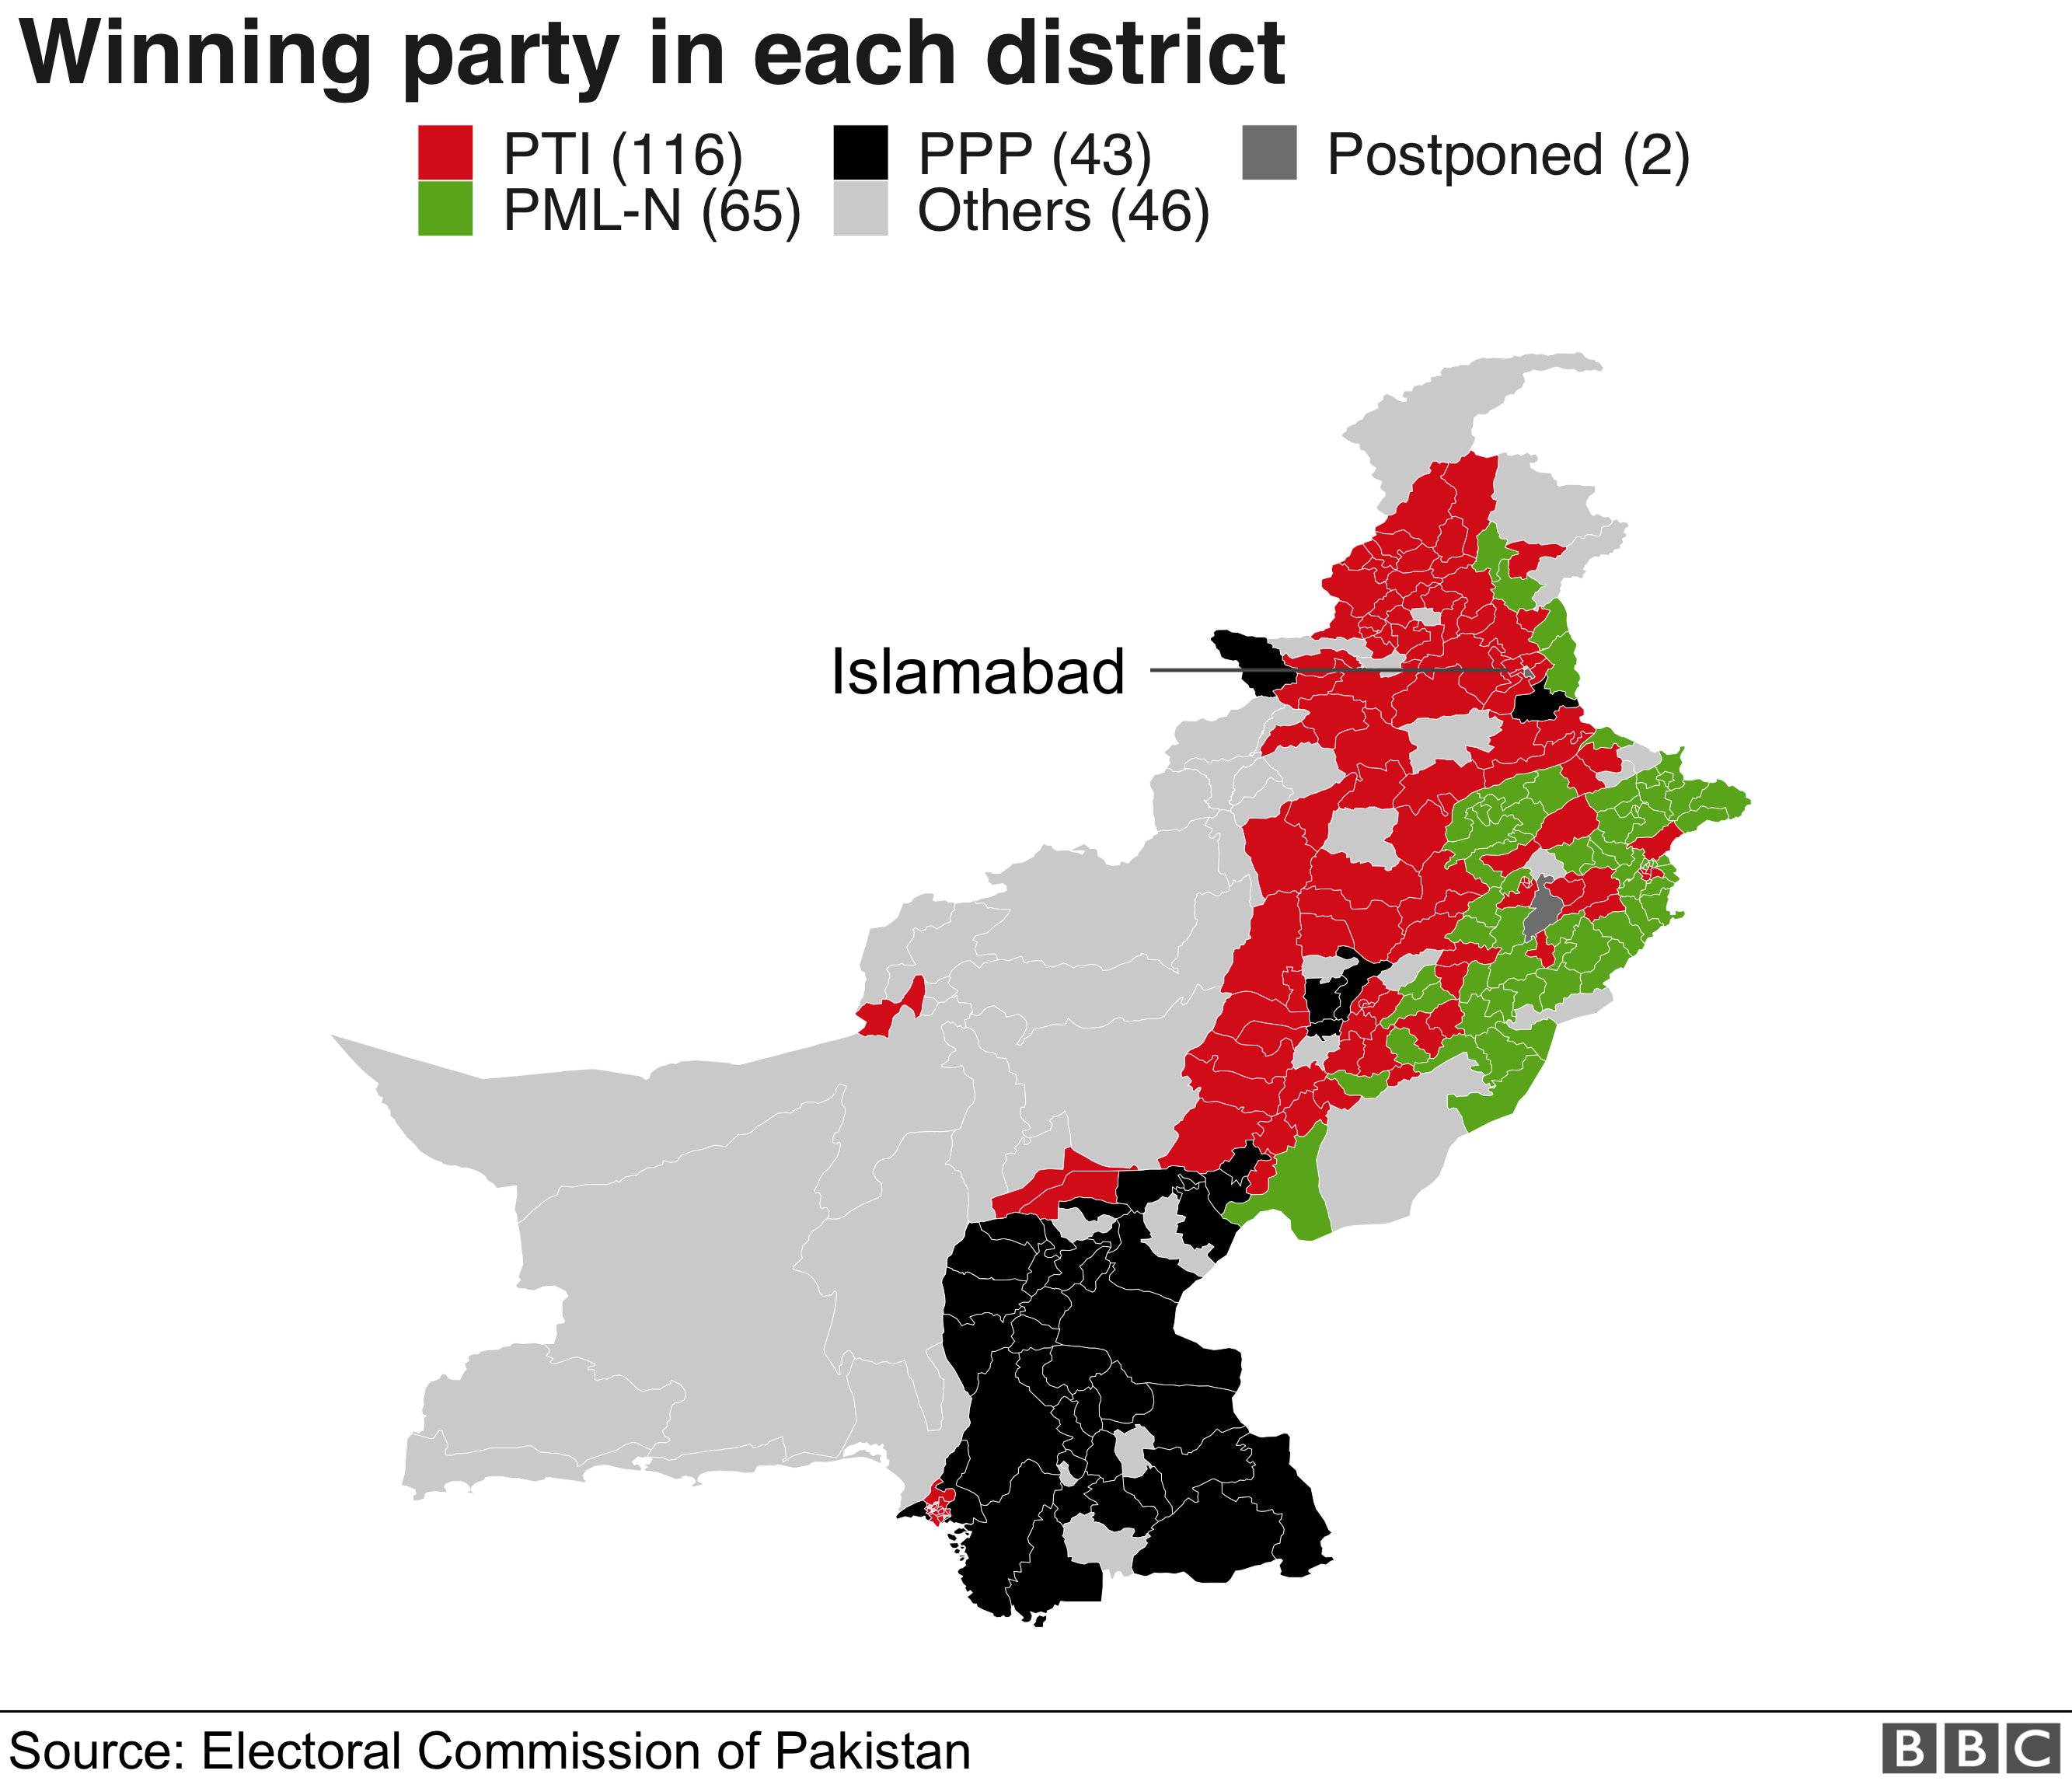 Pakistan election Imran Khan claims victory amid rigging claims BBC News